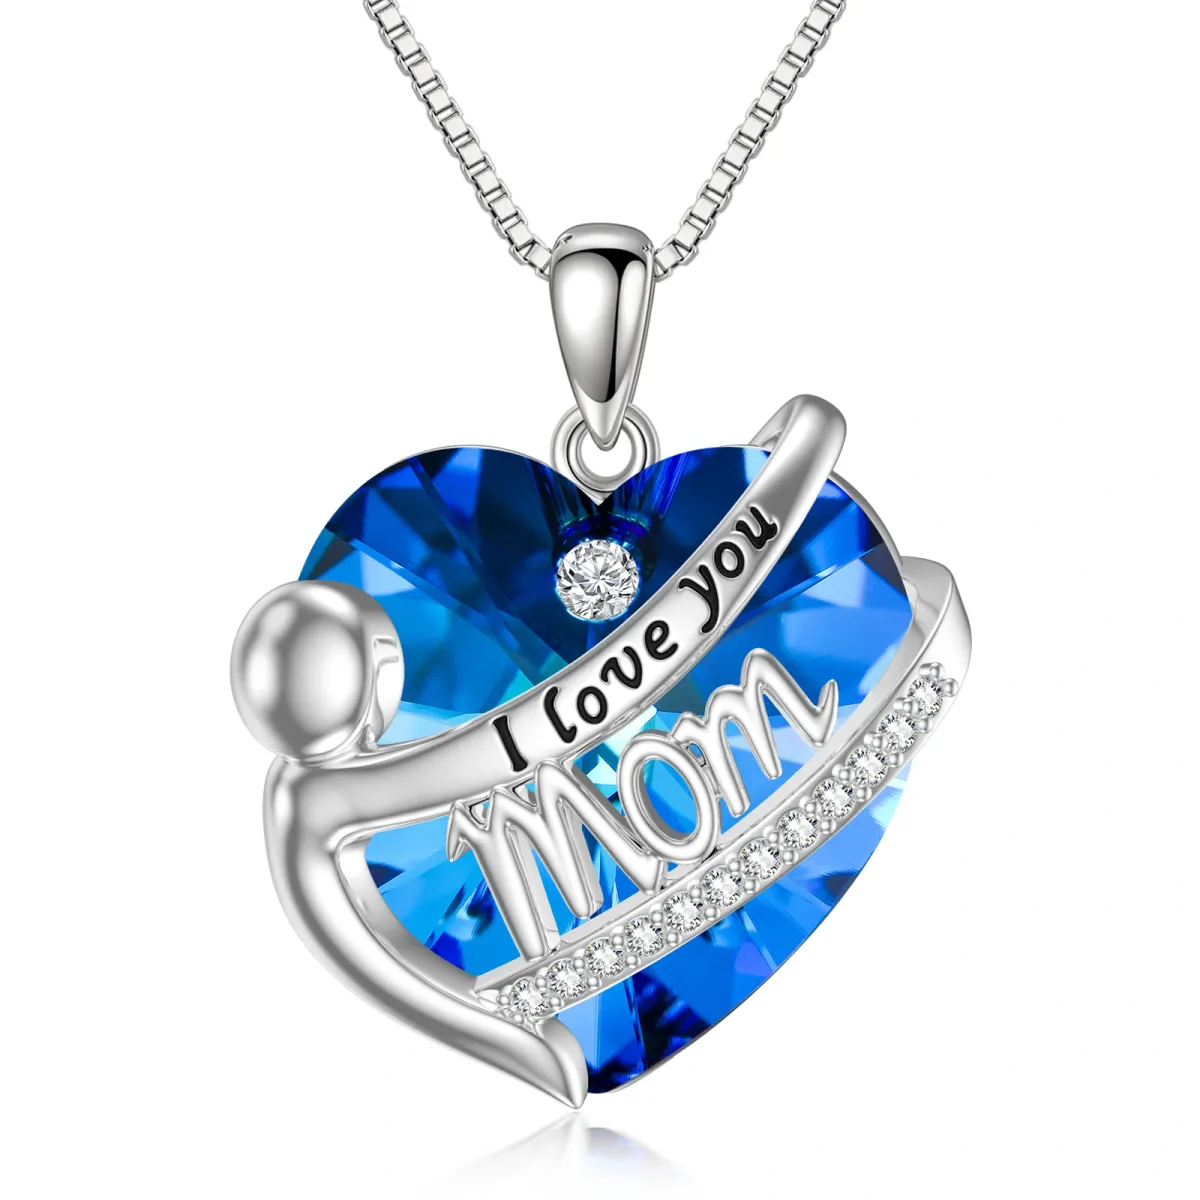 Sterling Silver Heart Crystal Pendant Necklace with Engraved Word-1